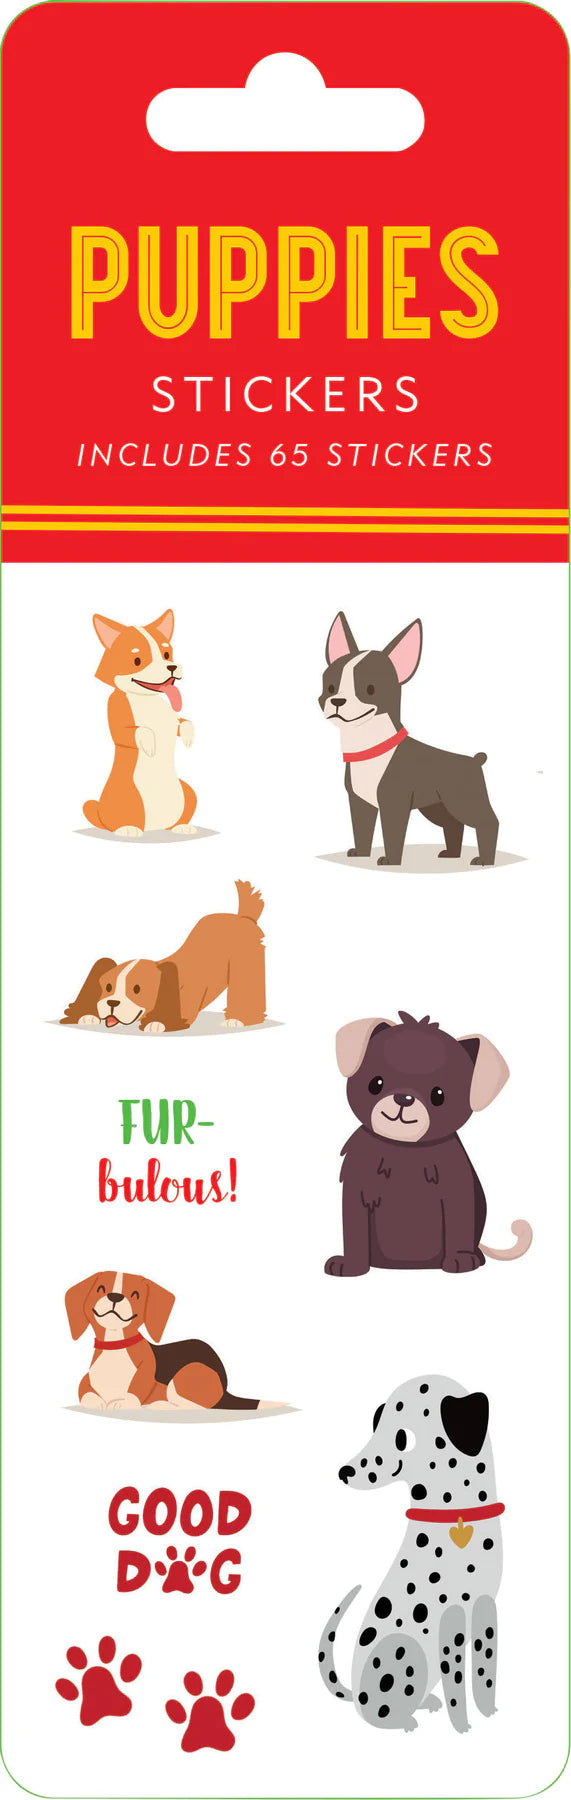 Puppies Stickers